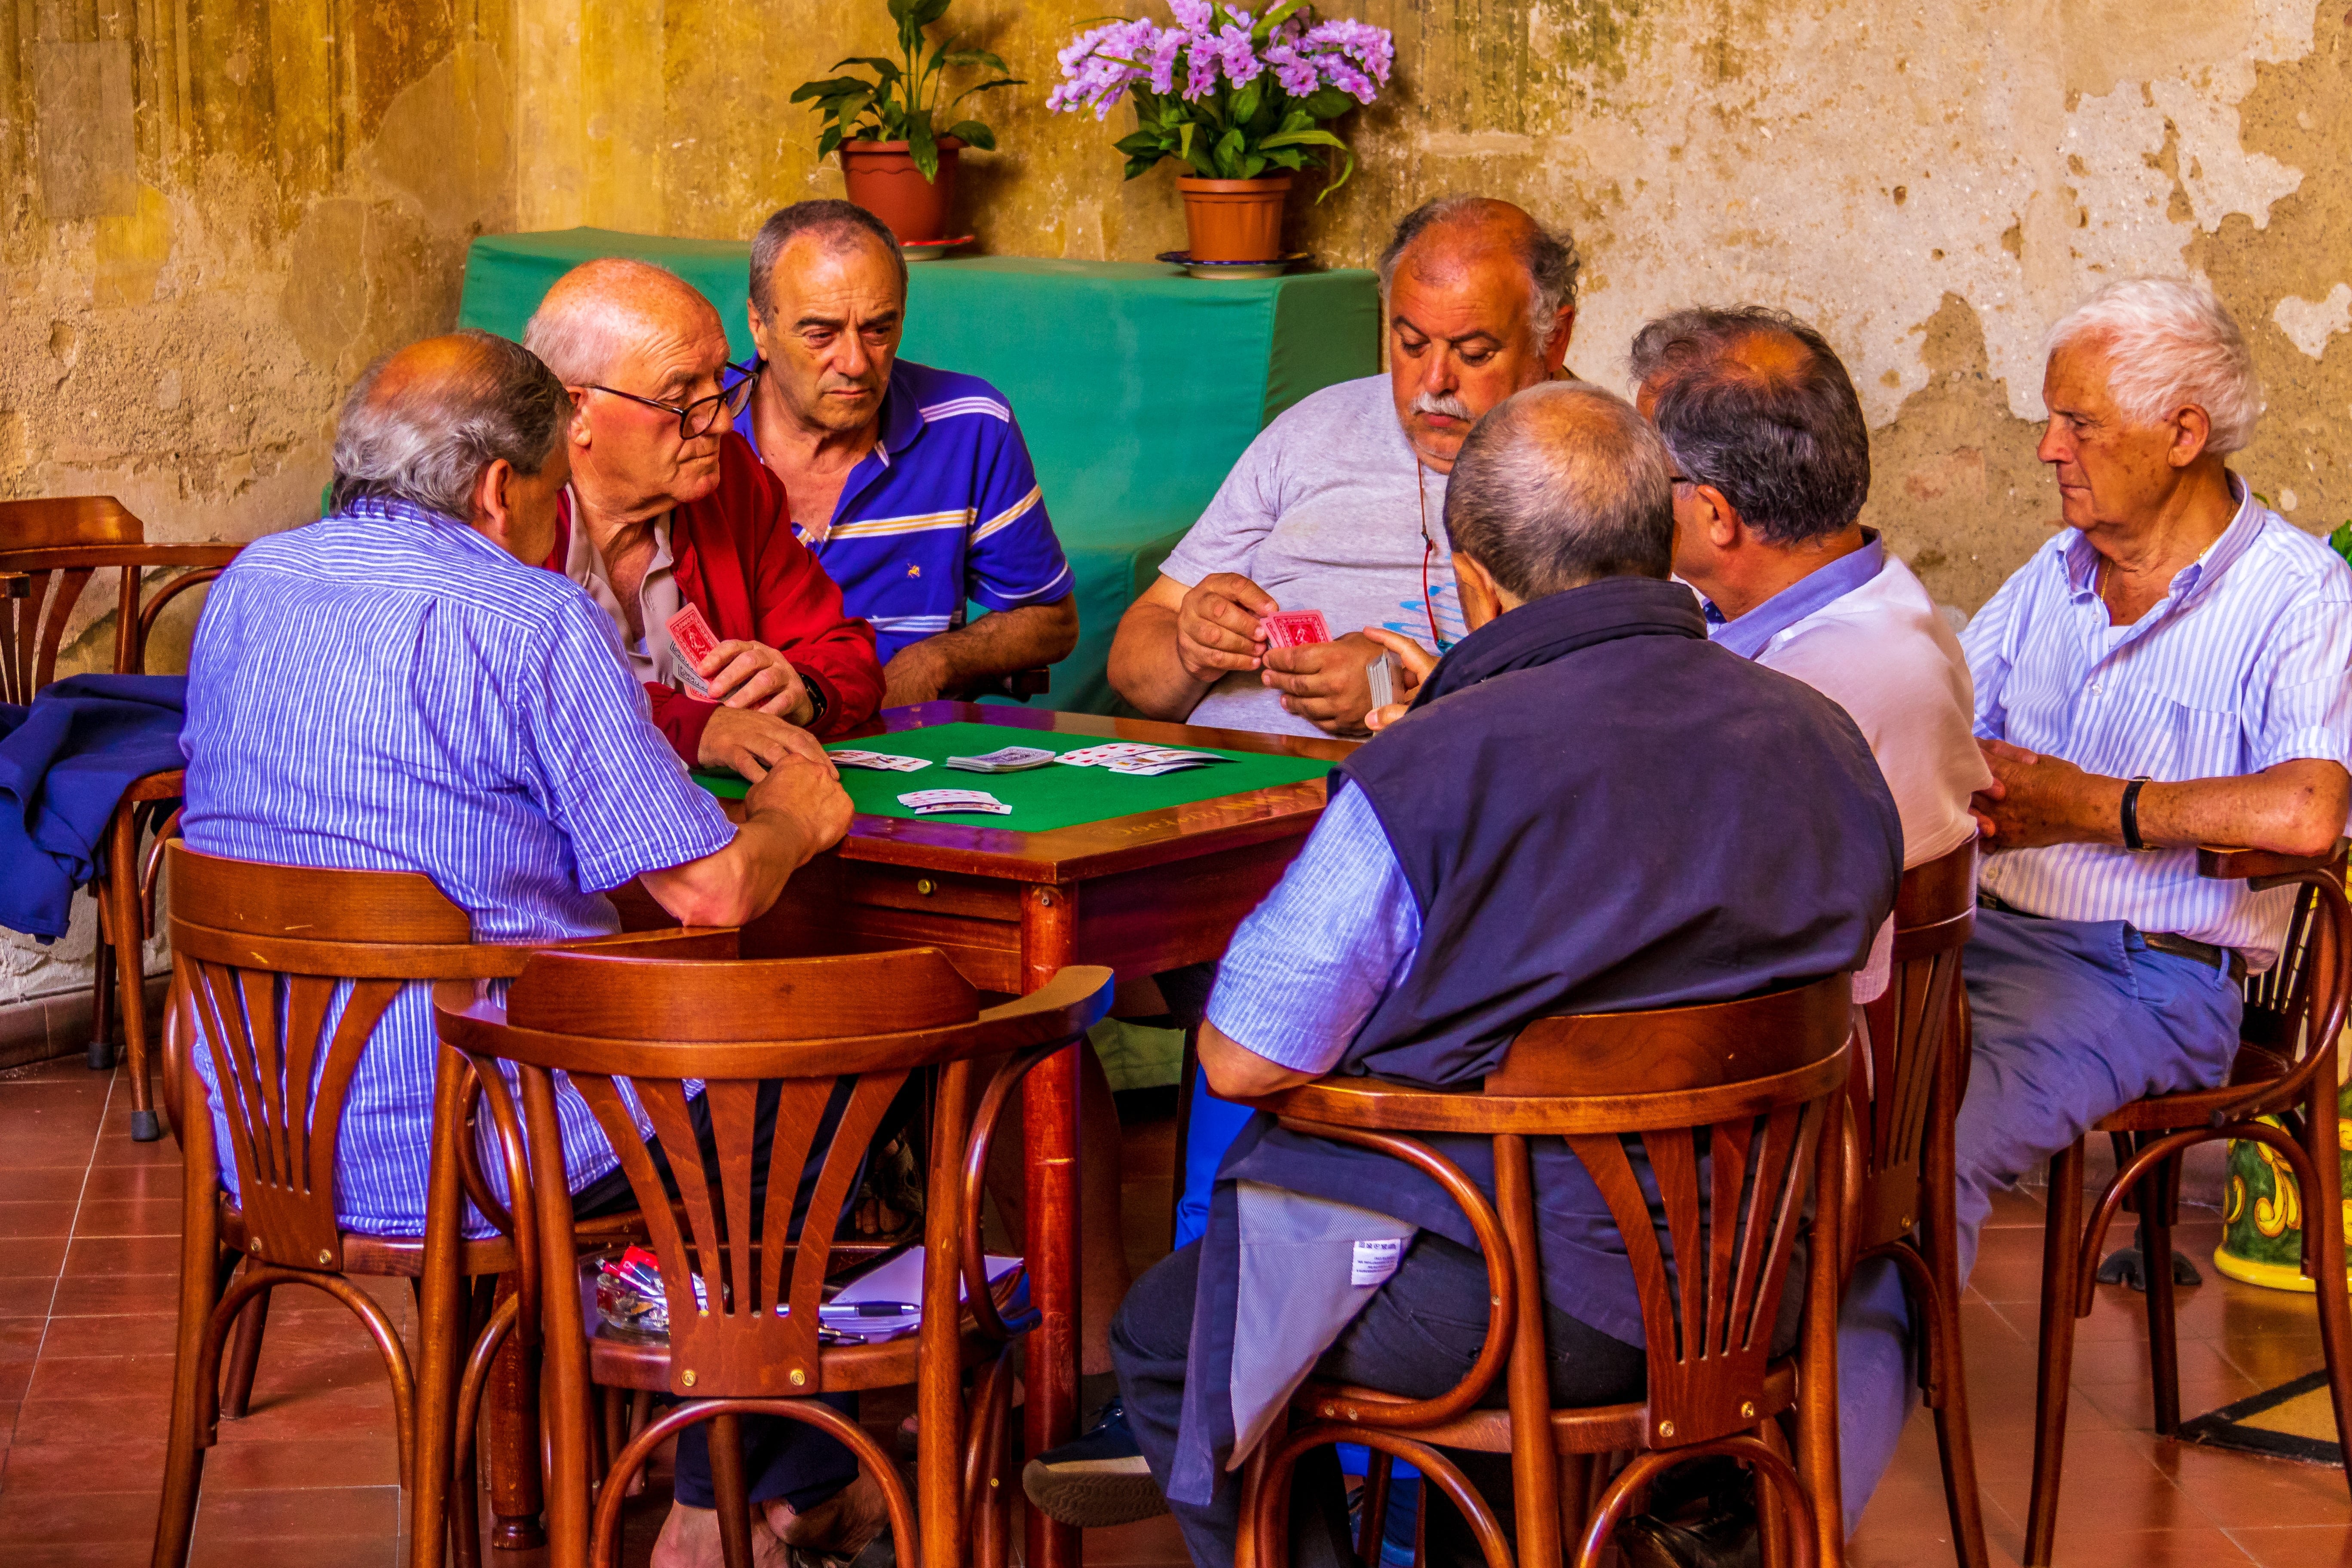 Men sit around playing a game in Naples, Italy